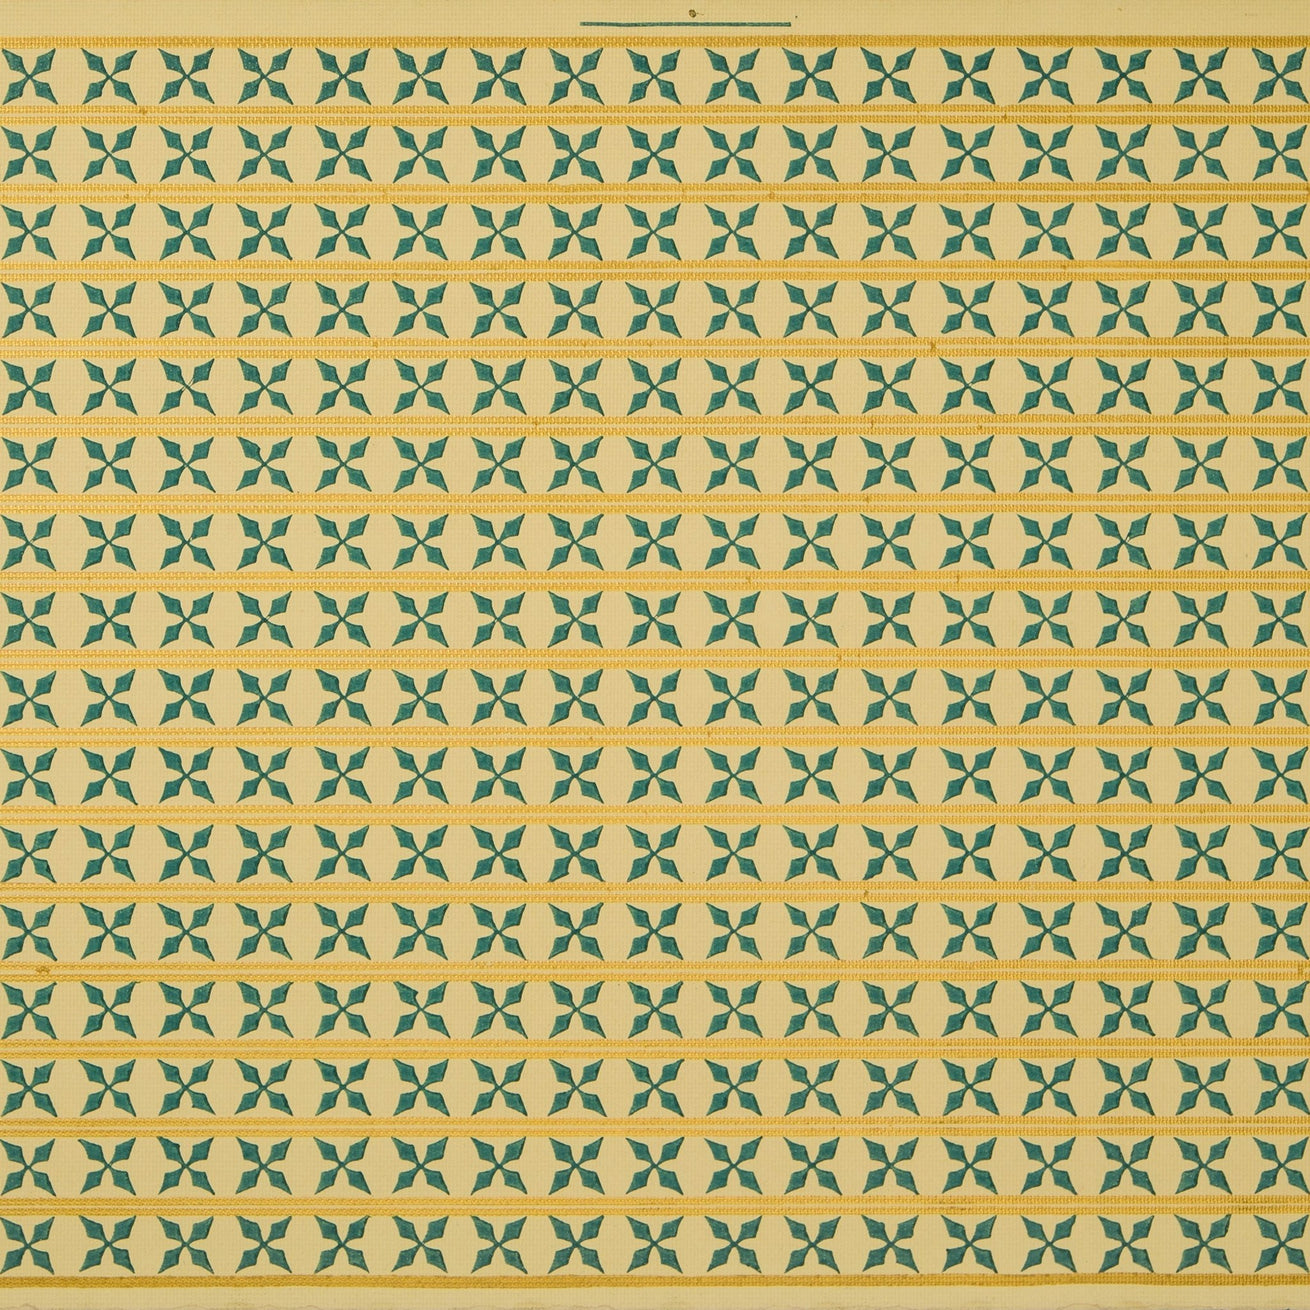 Fine Gridded Pattern of Small Crosses - Antique Wallpaper Remnant